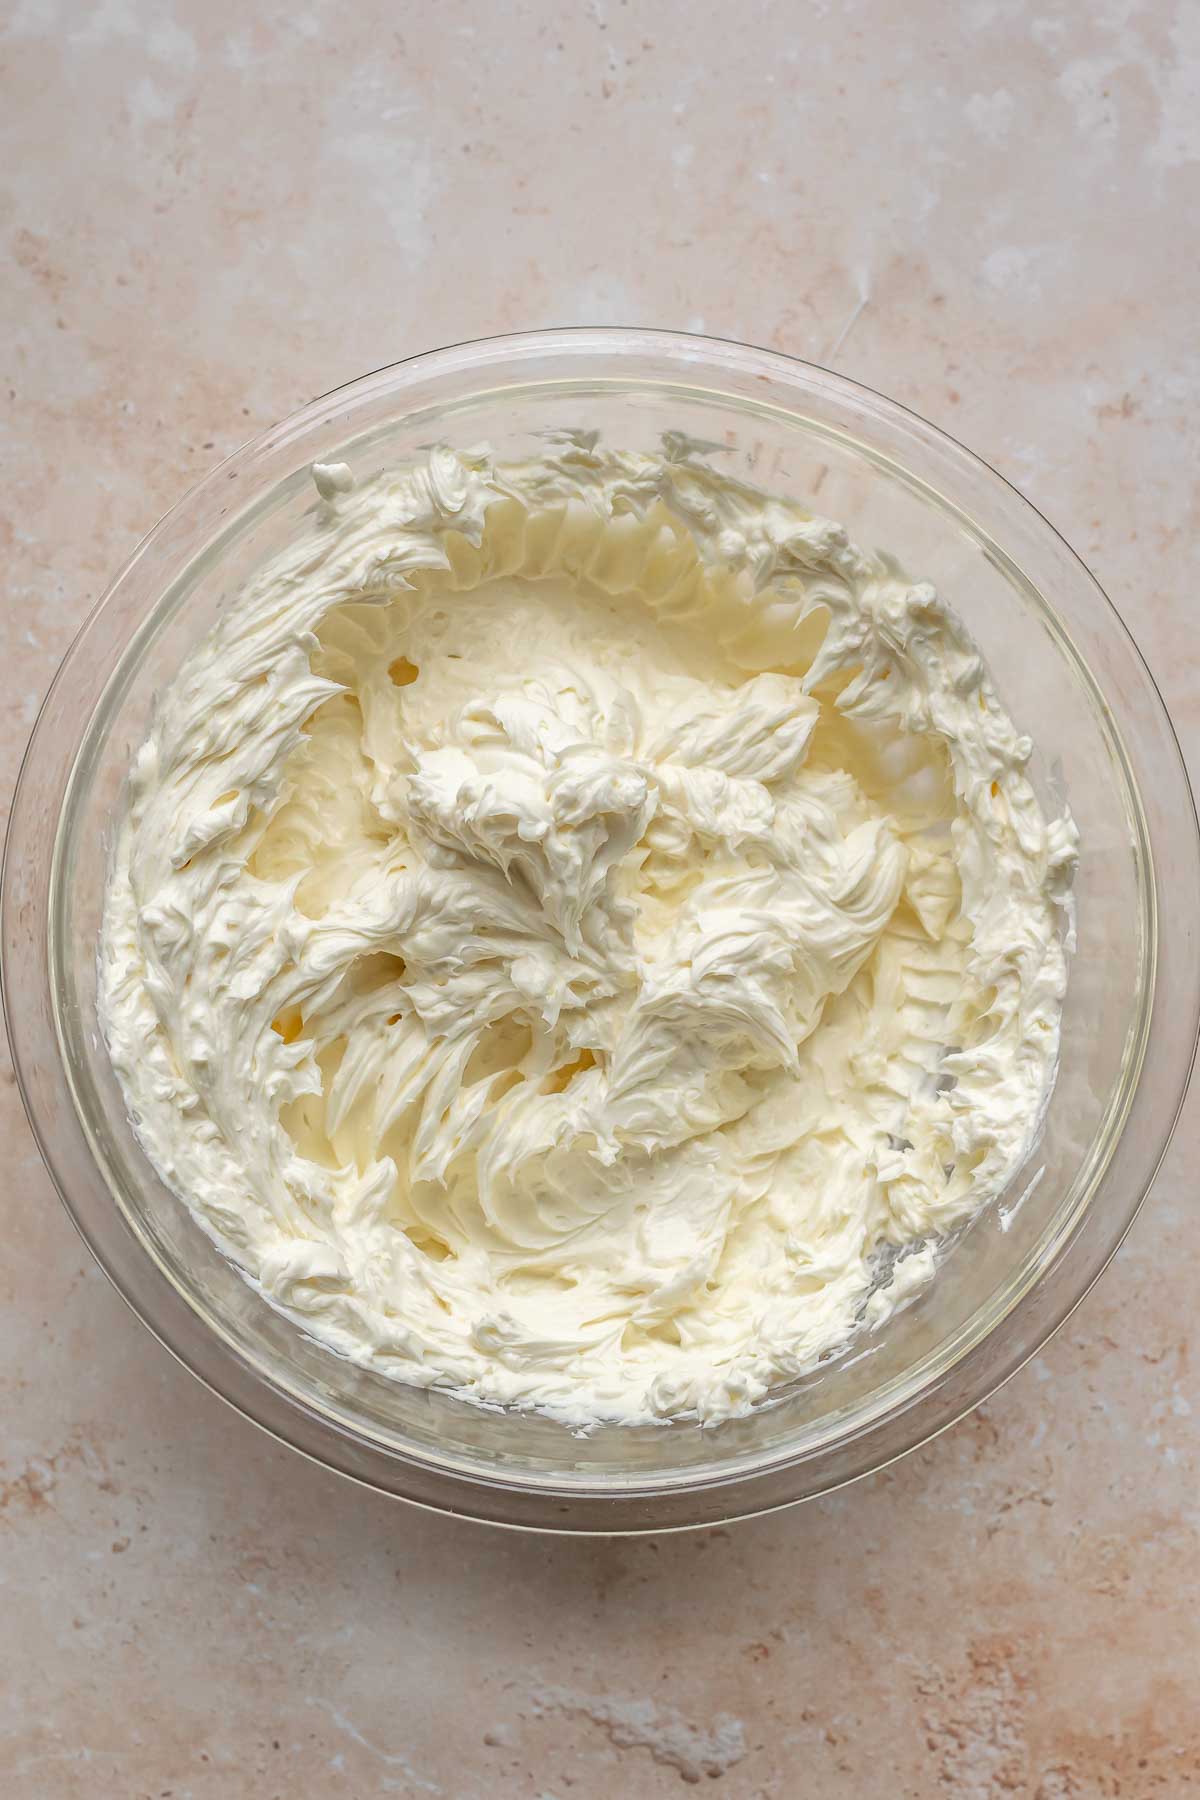 Cream cheese whisked in a mixing bowl.